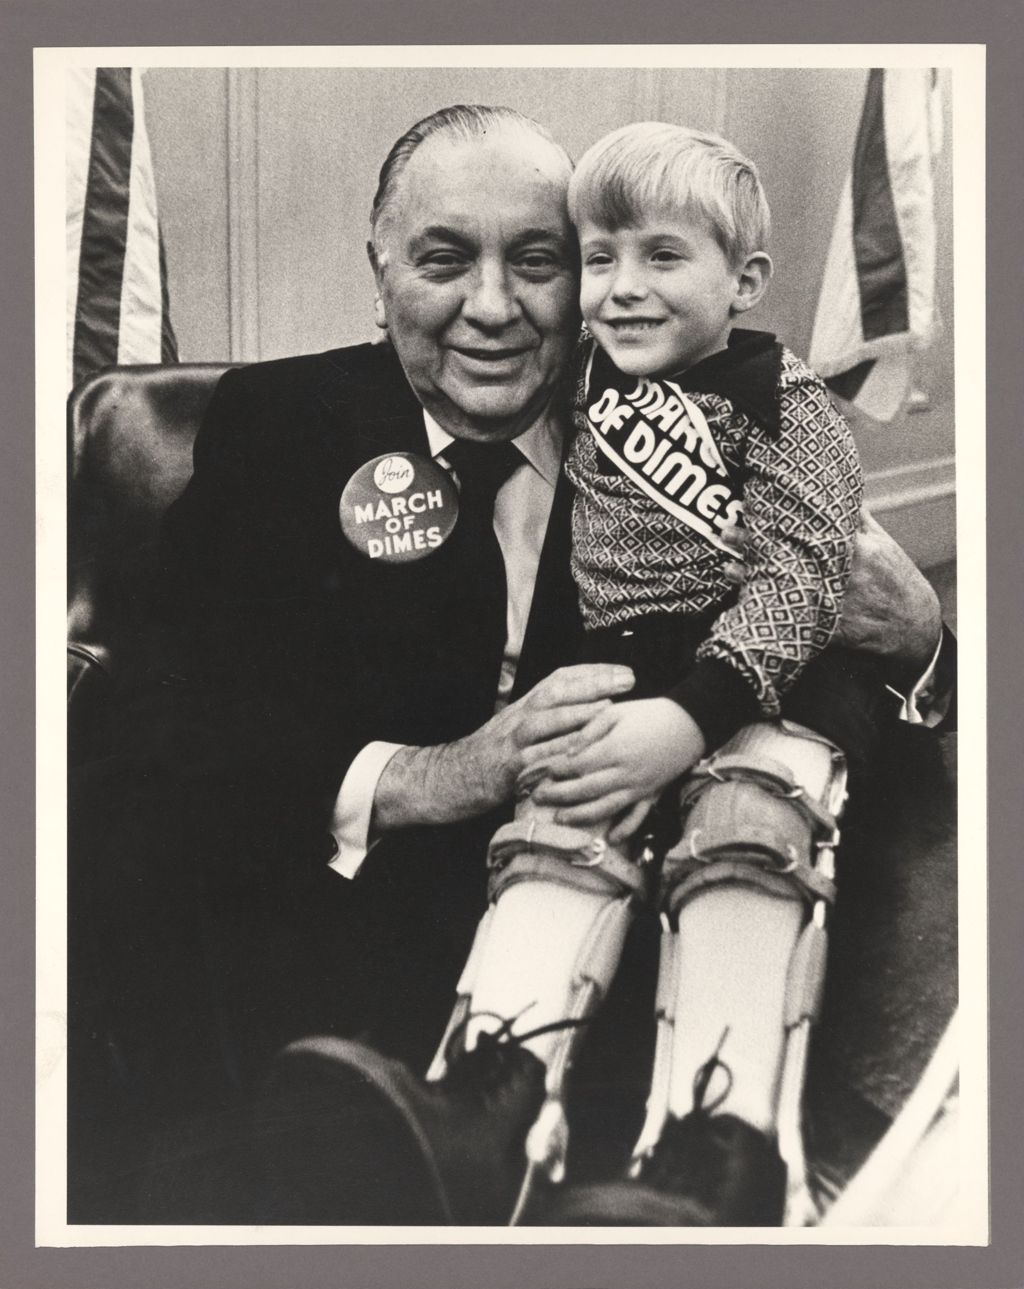 Miniature of Richard J. Daley with March of Dimes representative